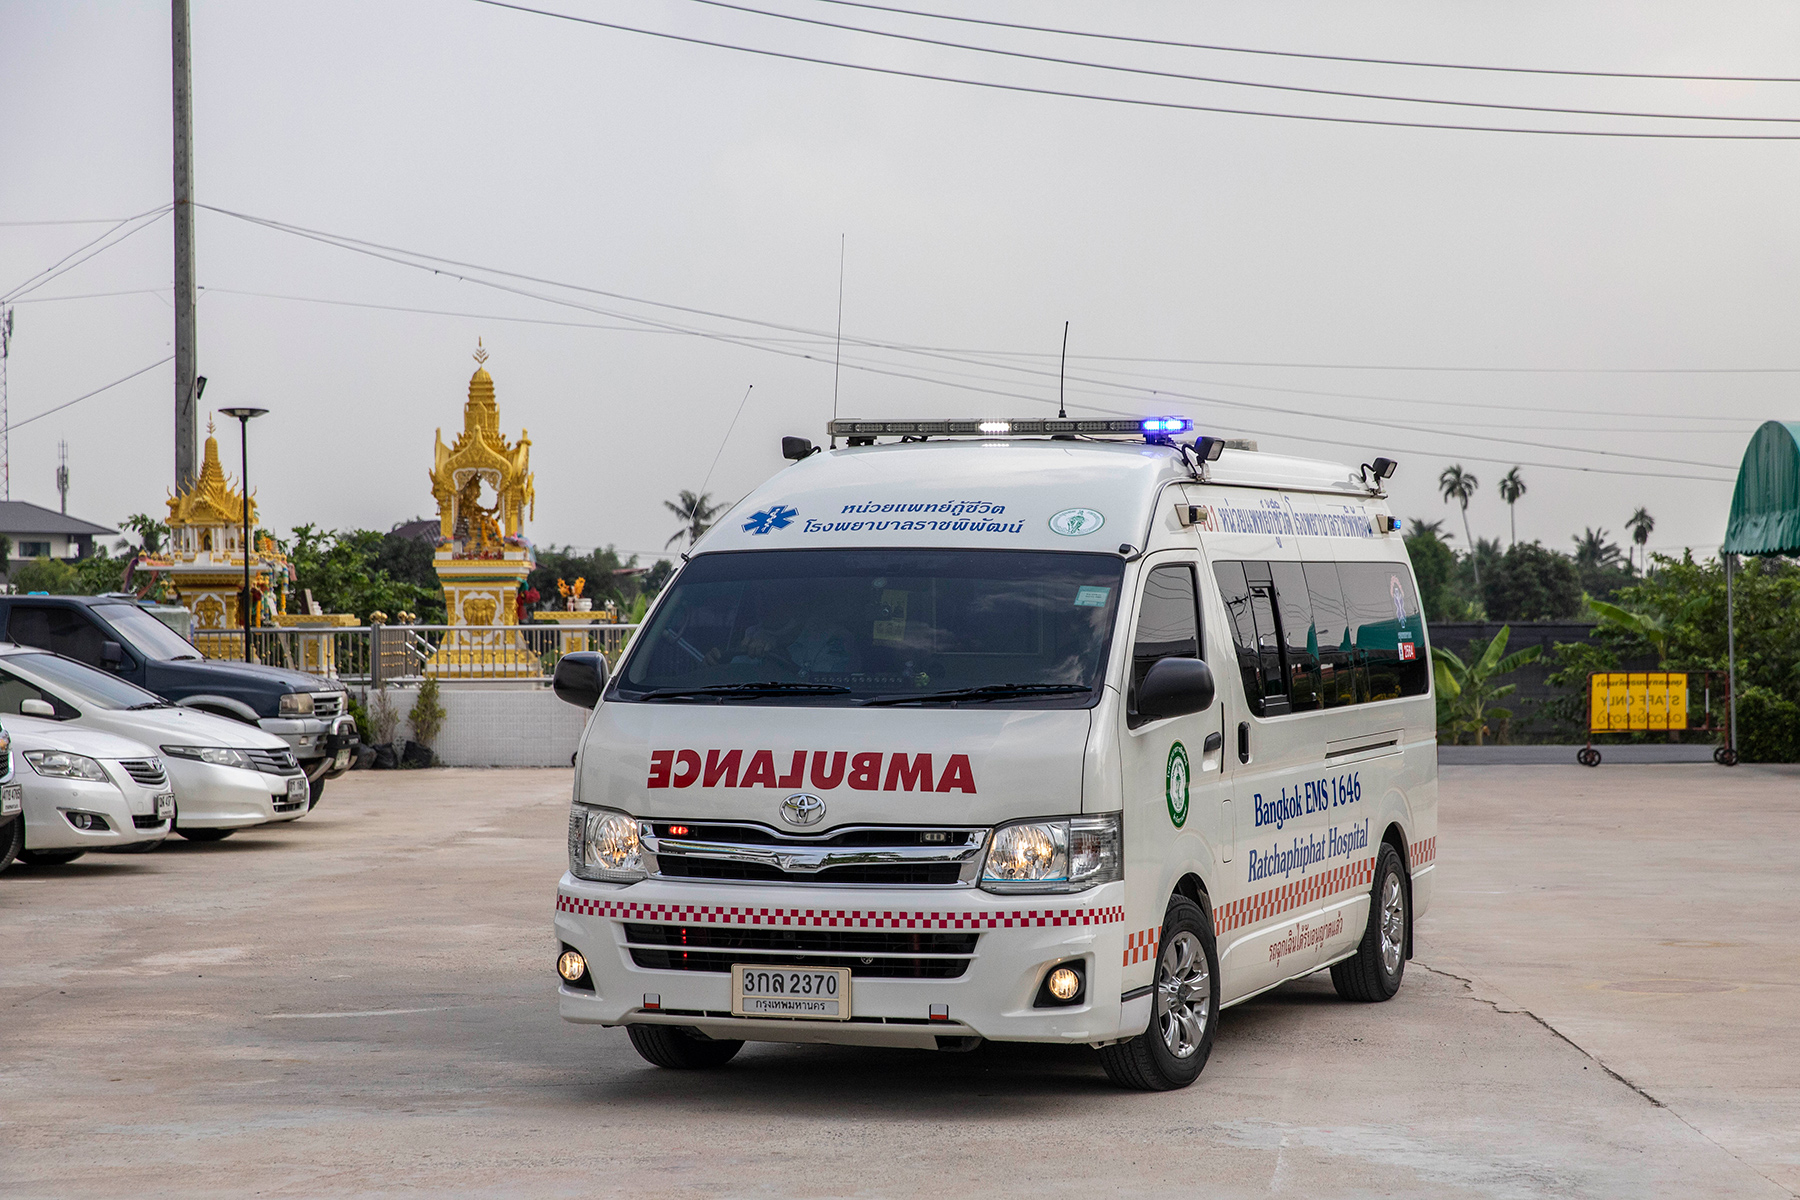 Ambulance in front of a Thai temple
